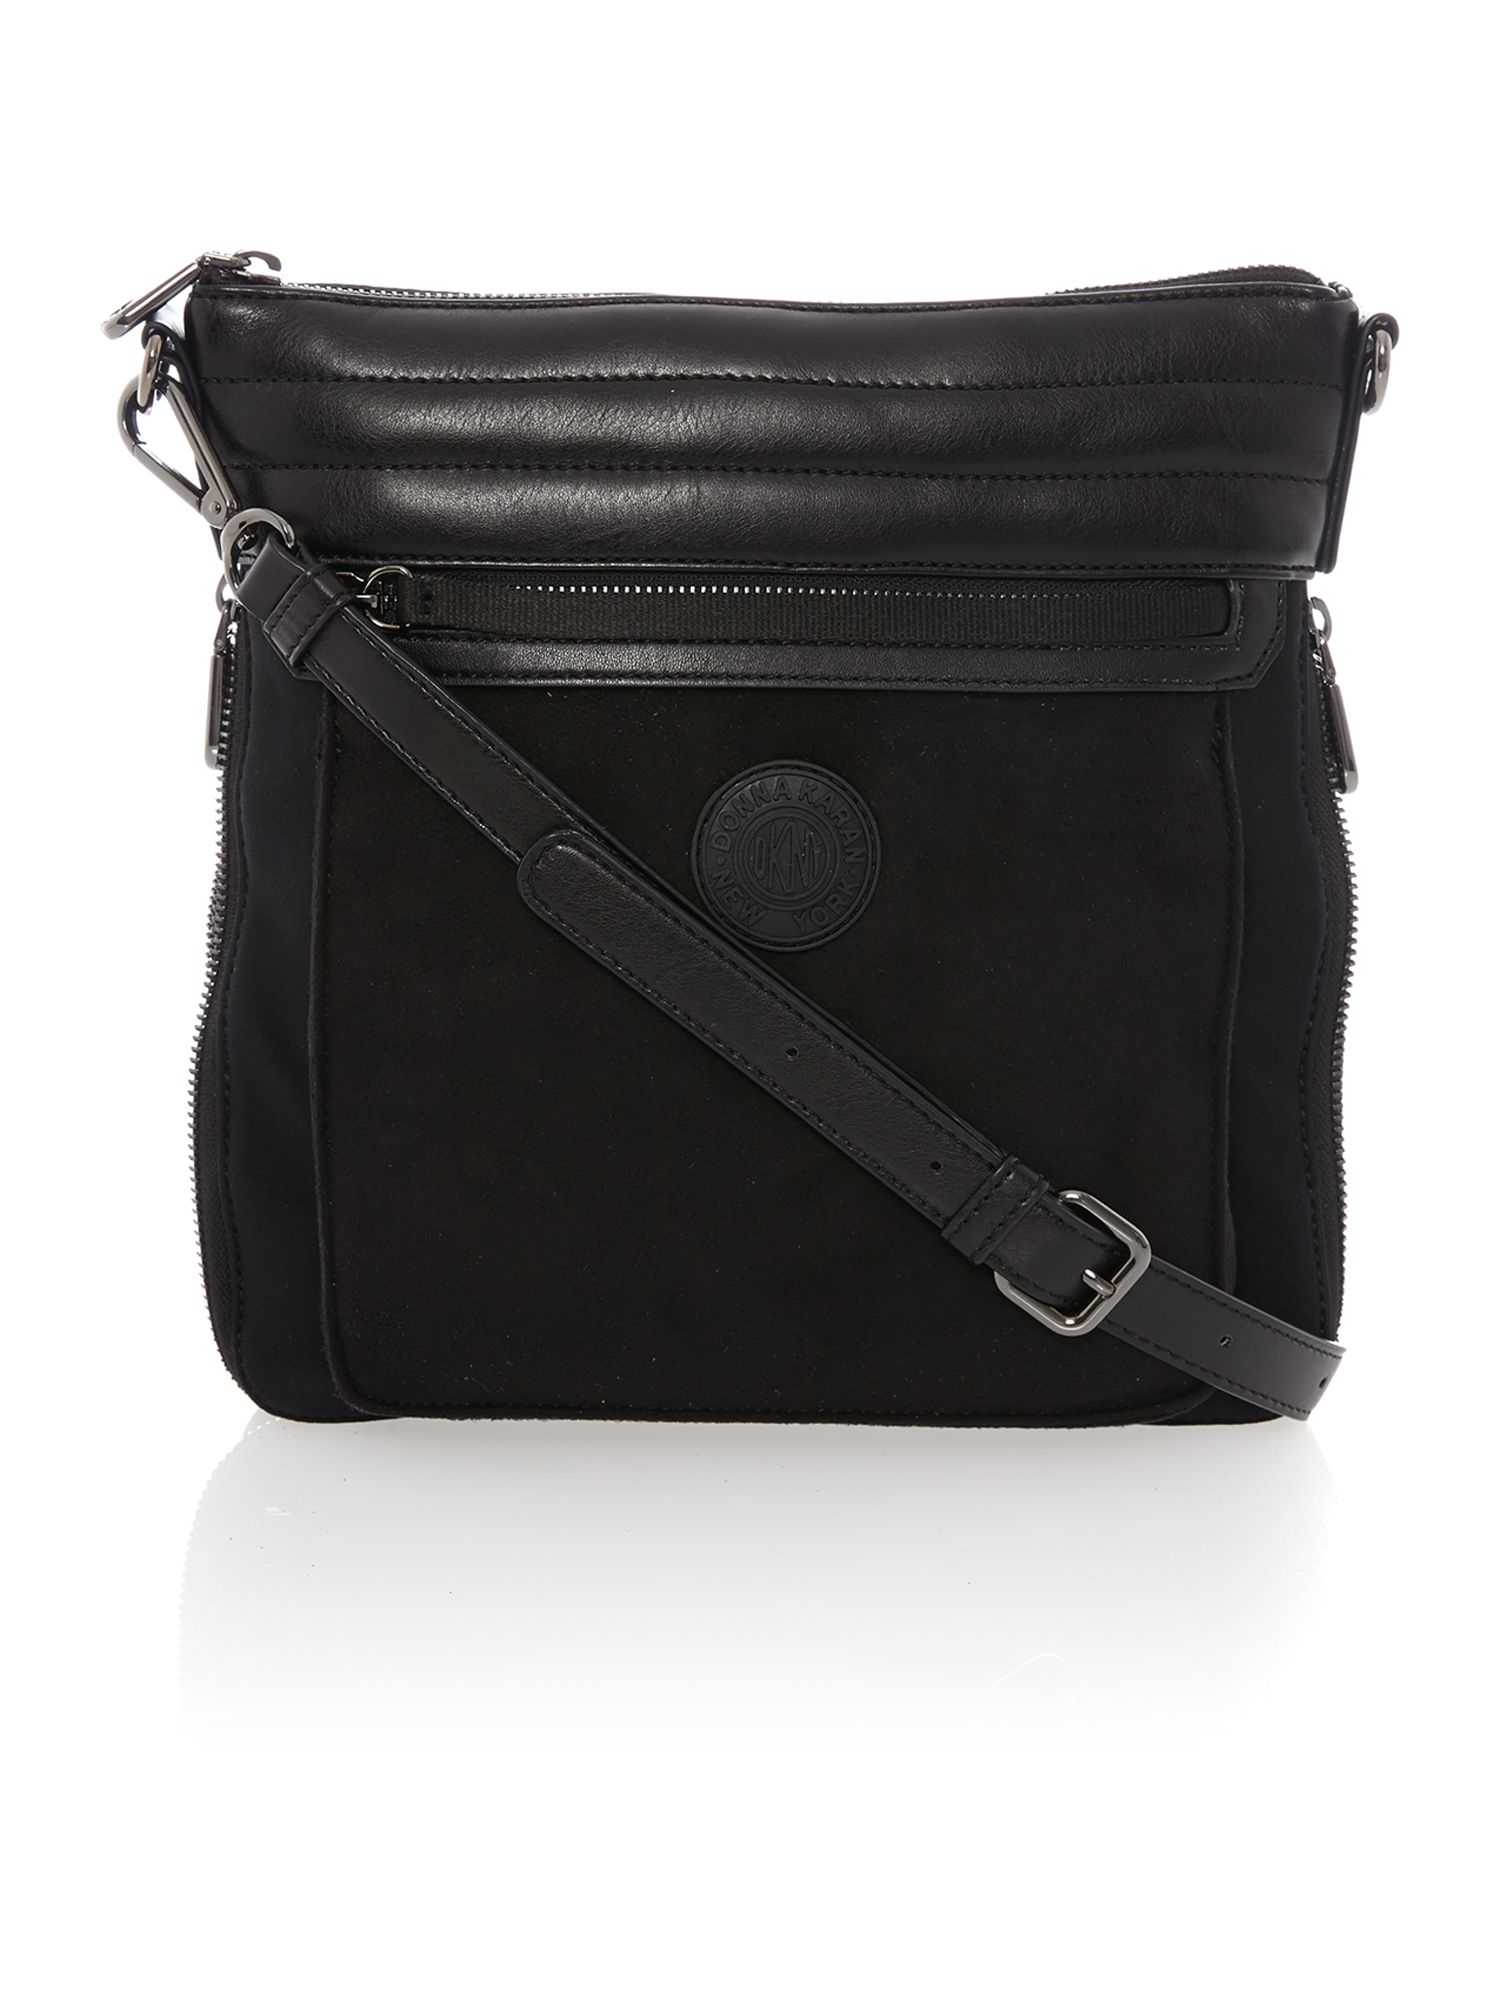 Dkny Black Quilted Mixed Media Cross Body Bag in Black | Lyst